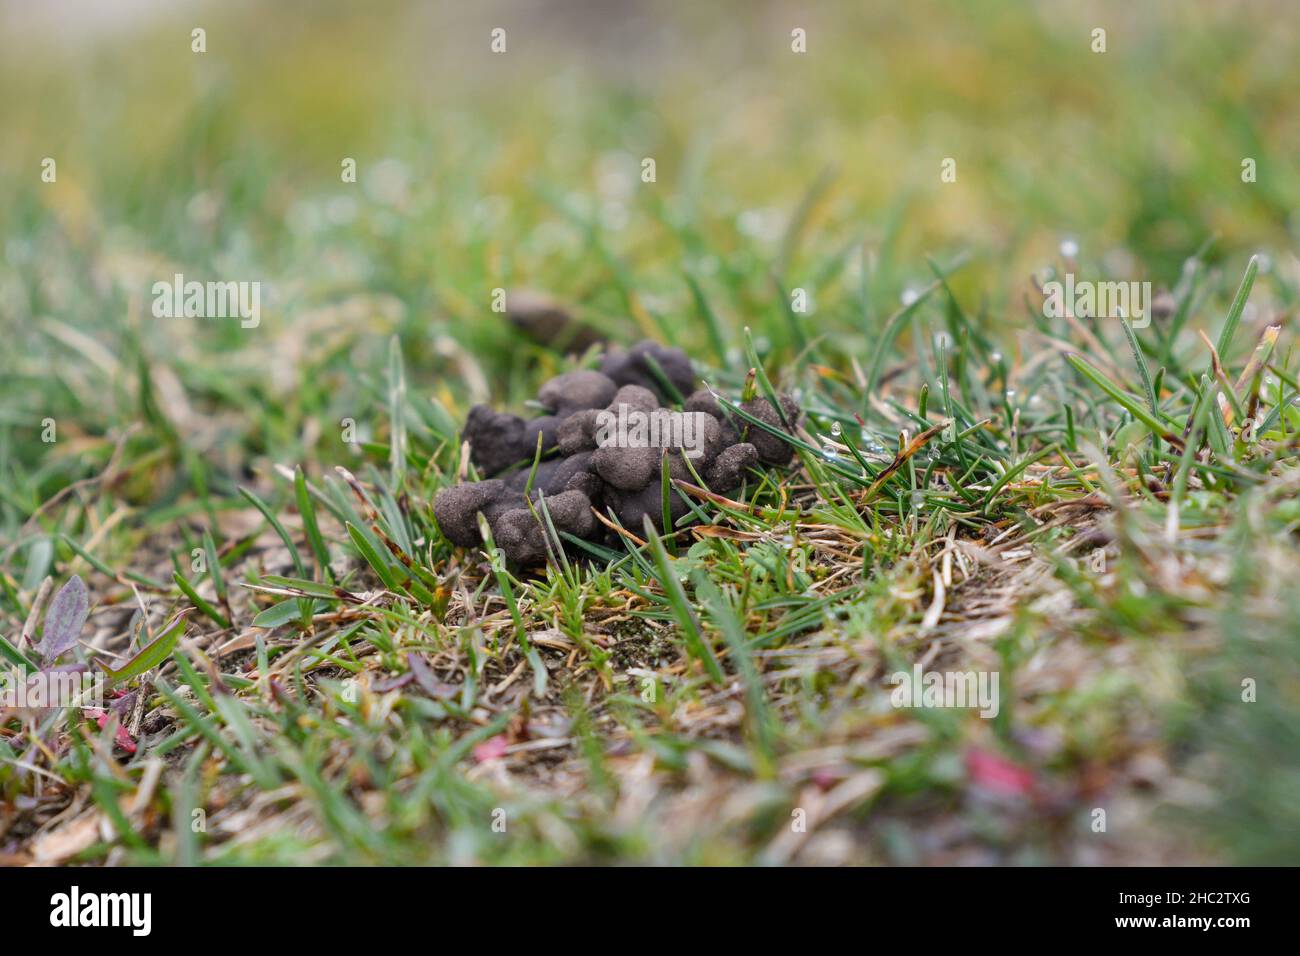 Closeup of a wormcast of an earthworm in a meadow Stock Photo